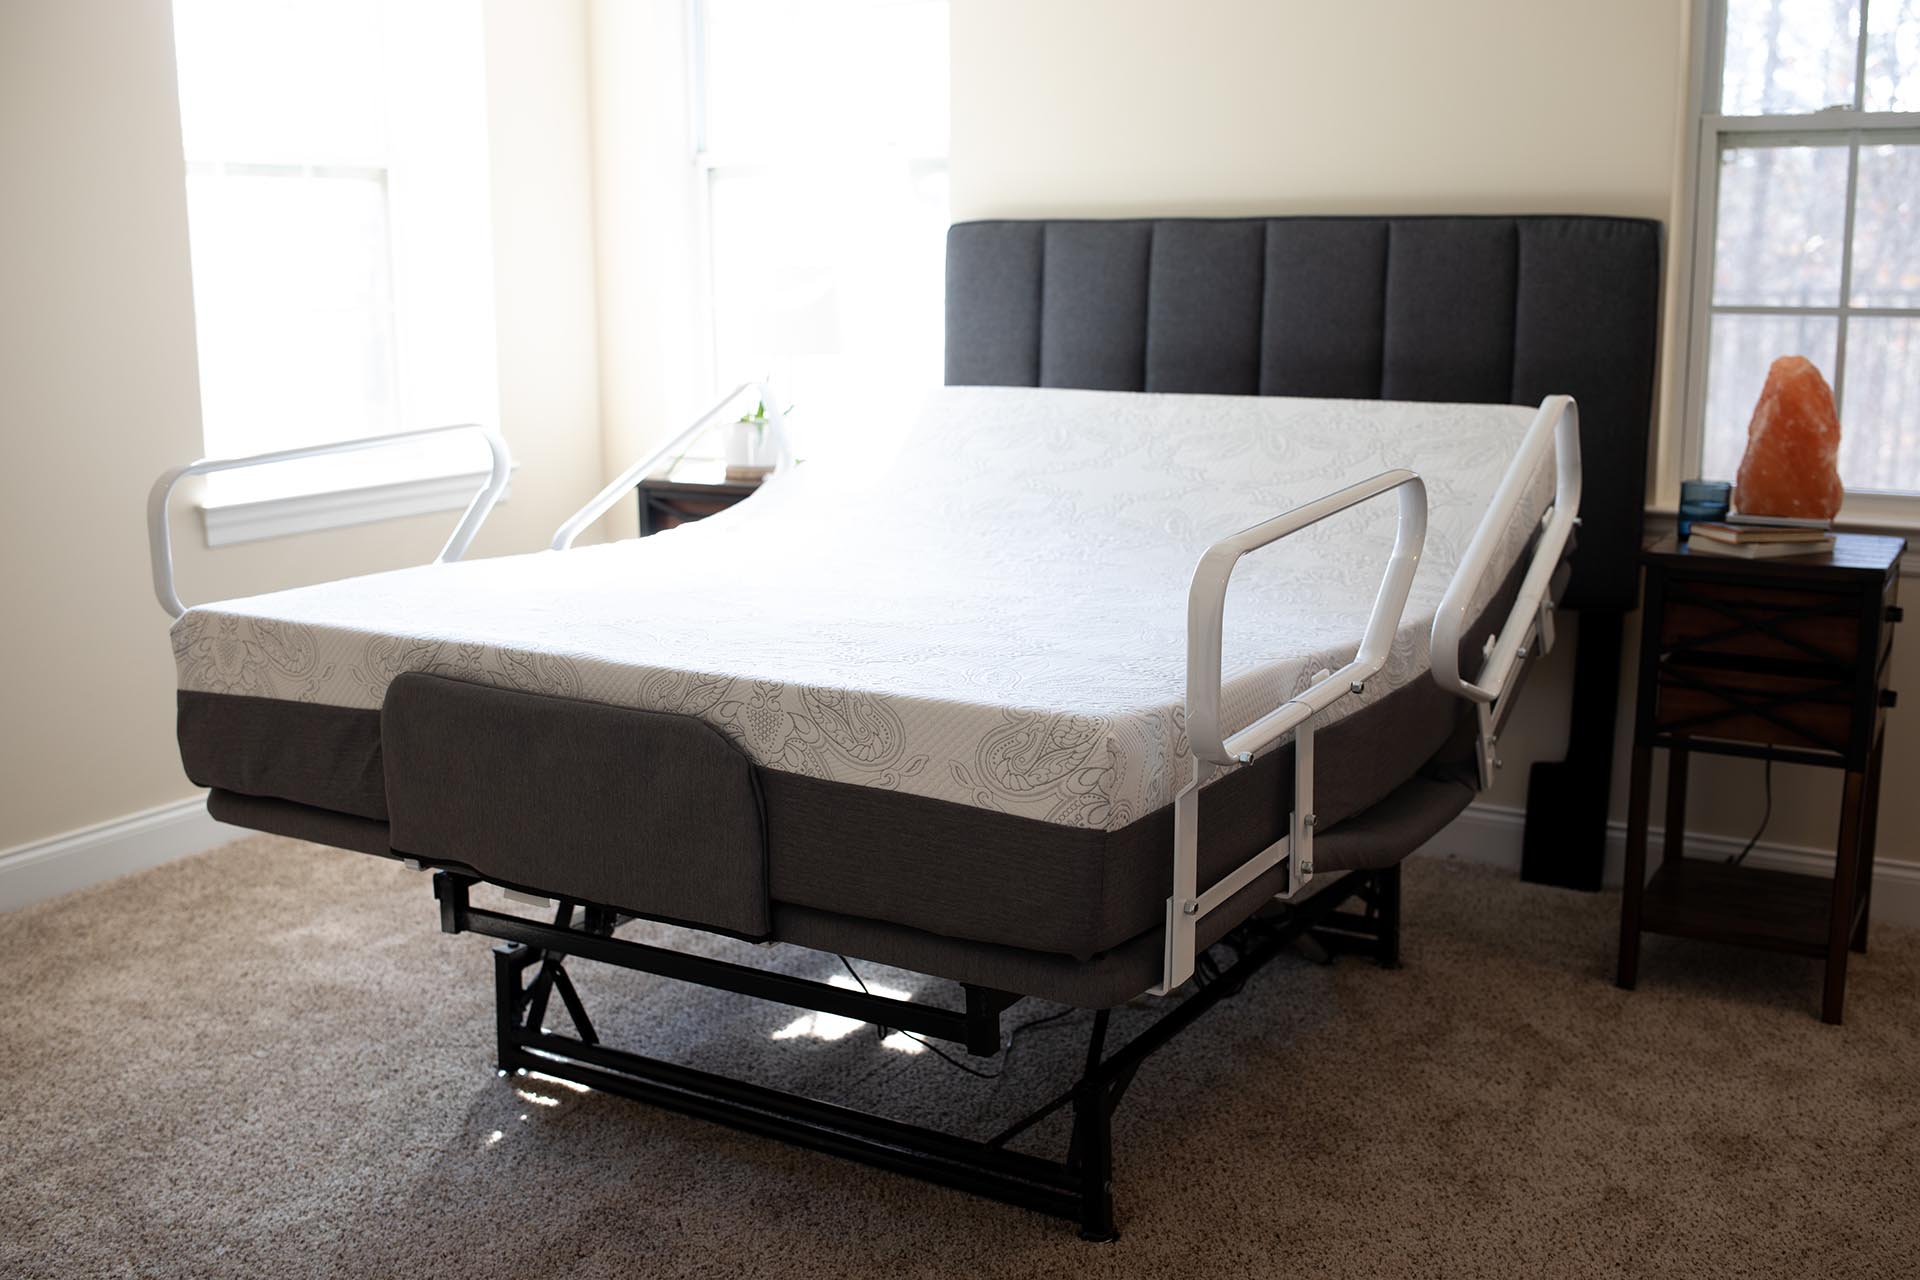 Phoenix flexabed high low fully electric hospital bed